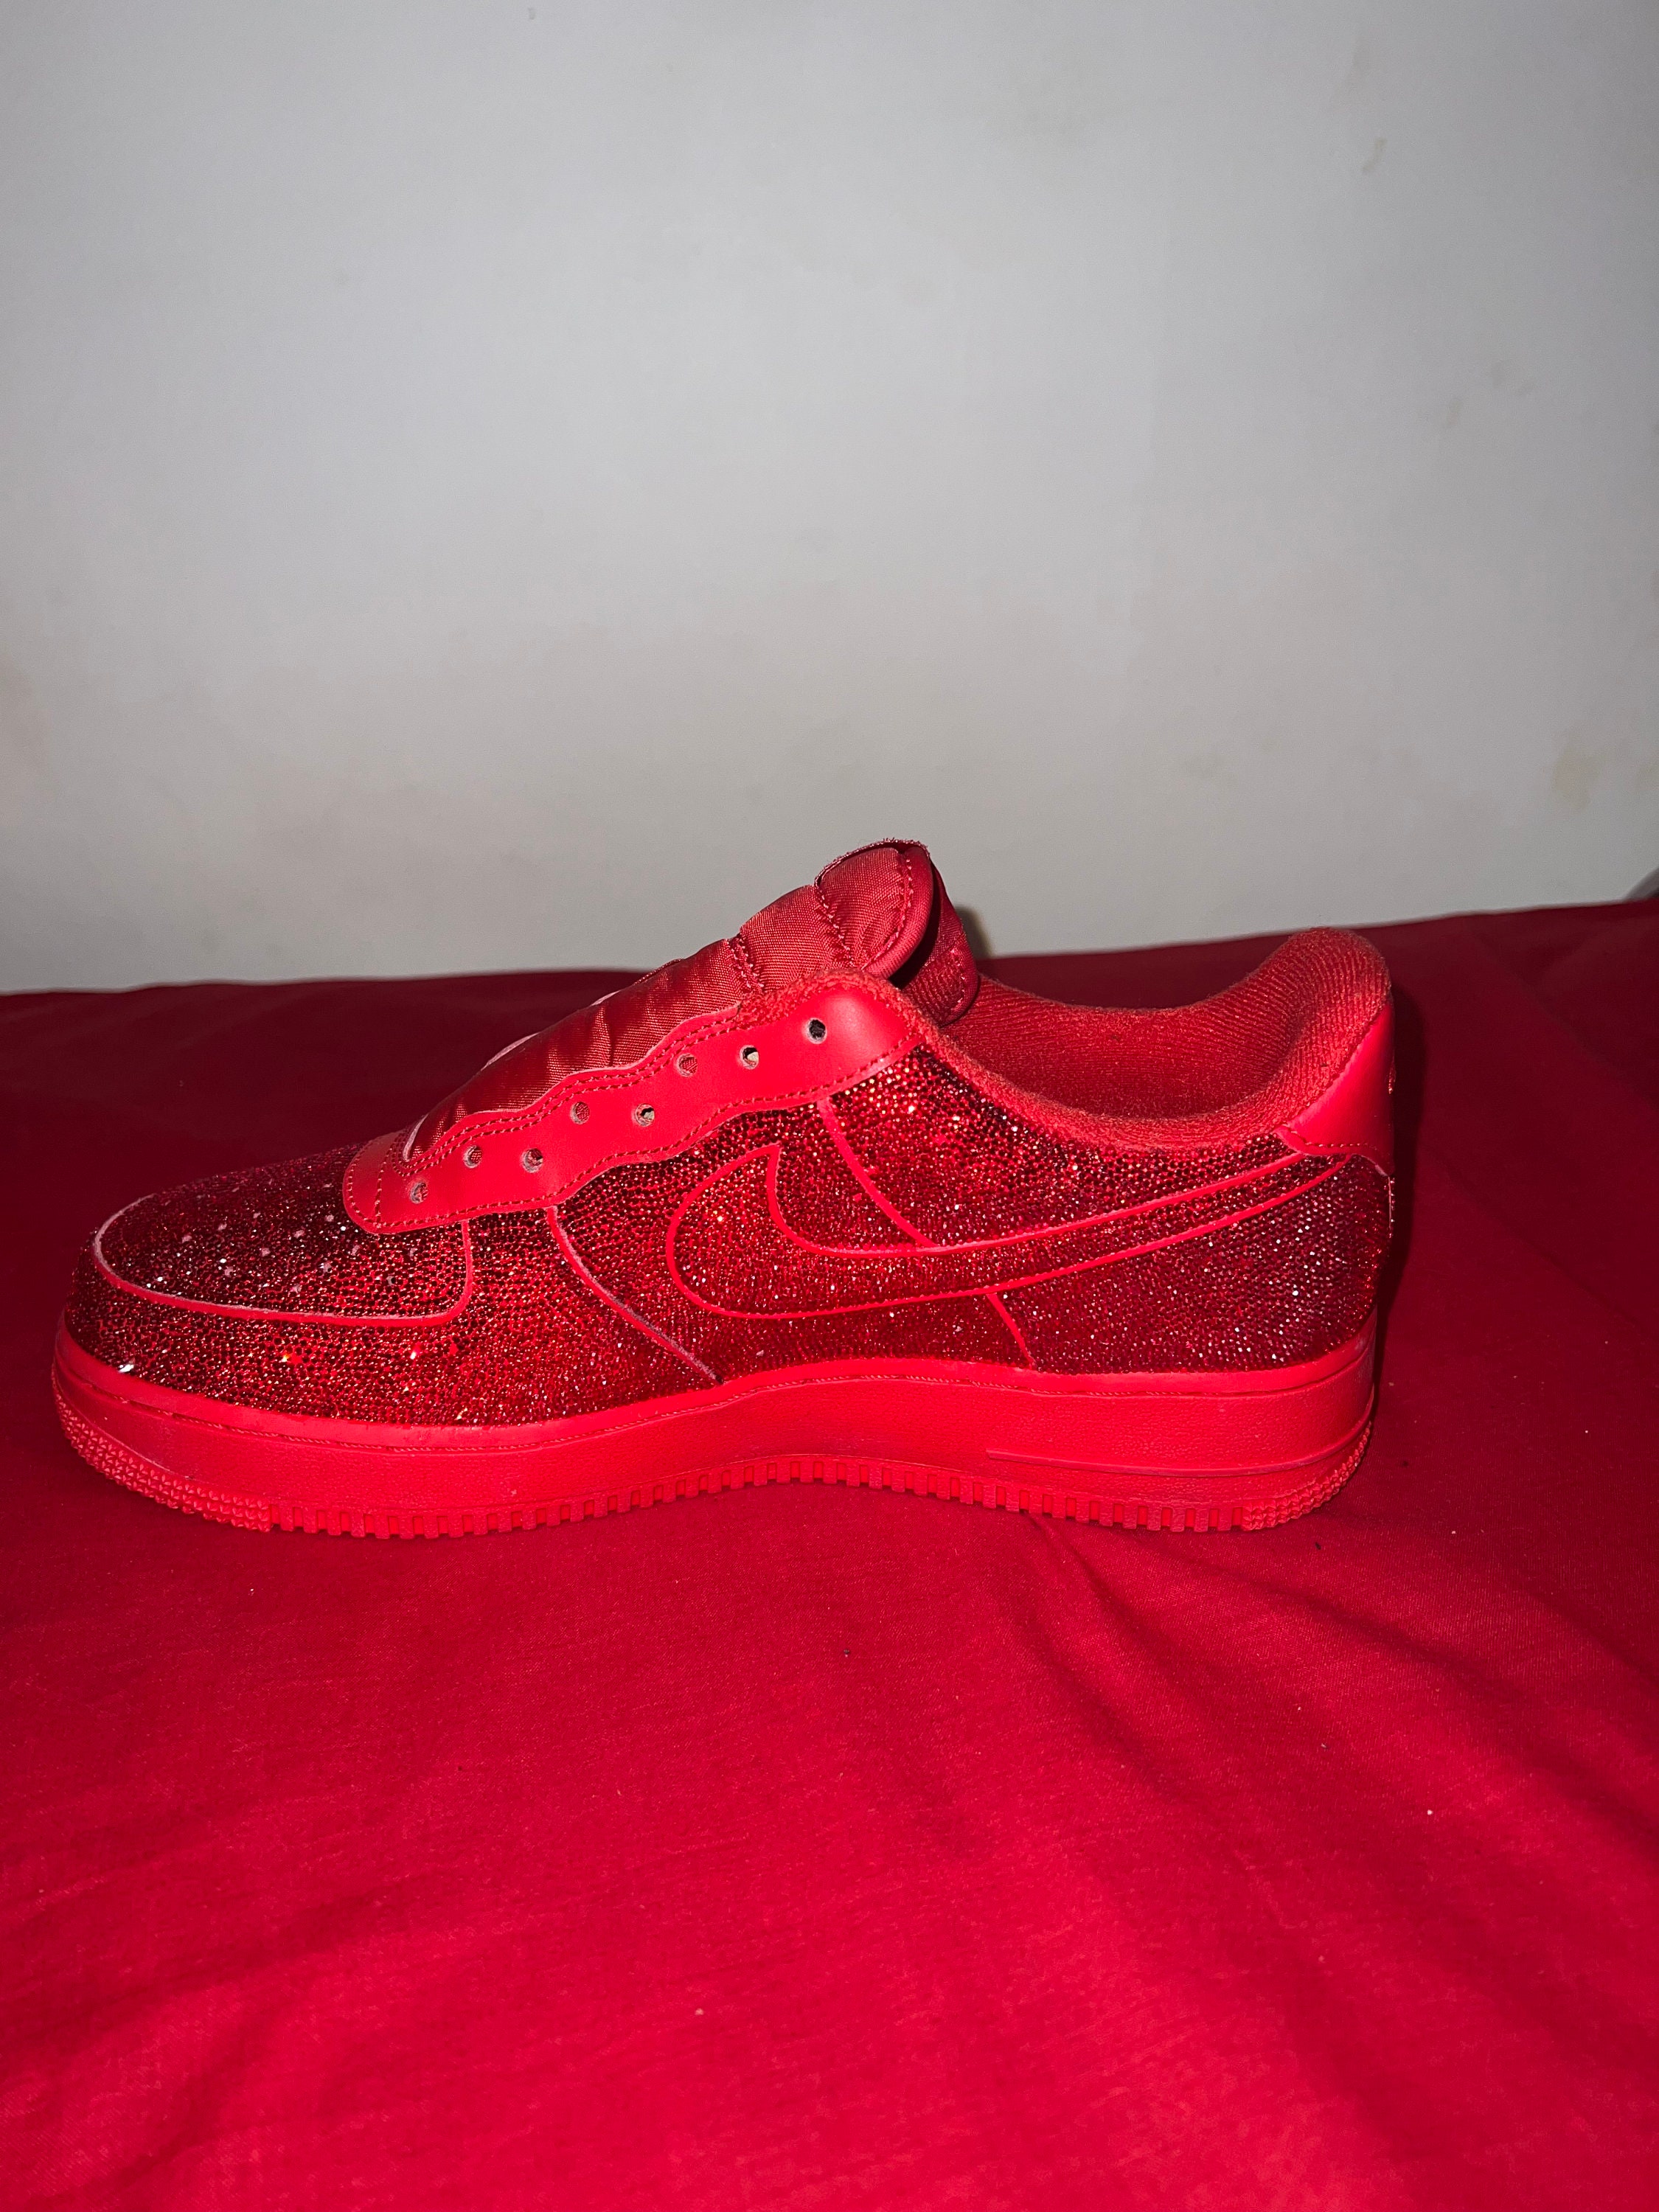 Custom Nike Air Force 1s With Crystals, Hand Placed Crystals, Crystalized,  Bedazzled, Gems, Rhinestone, Rhinestones 